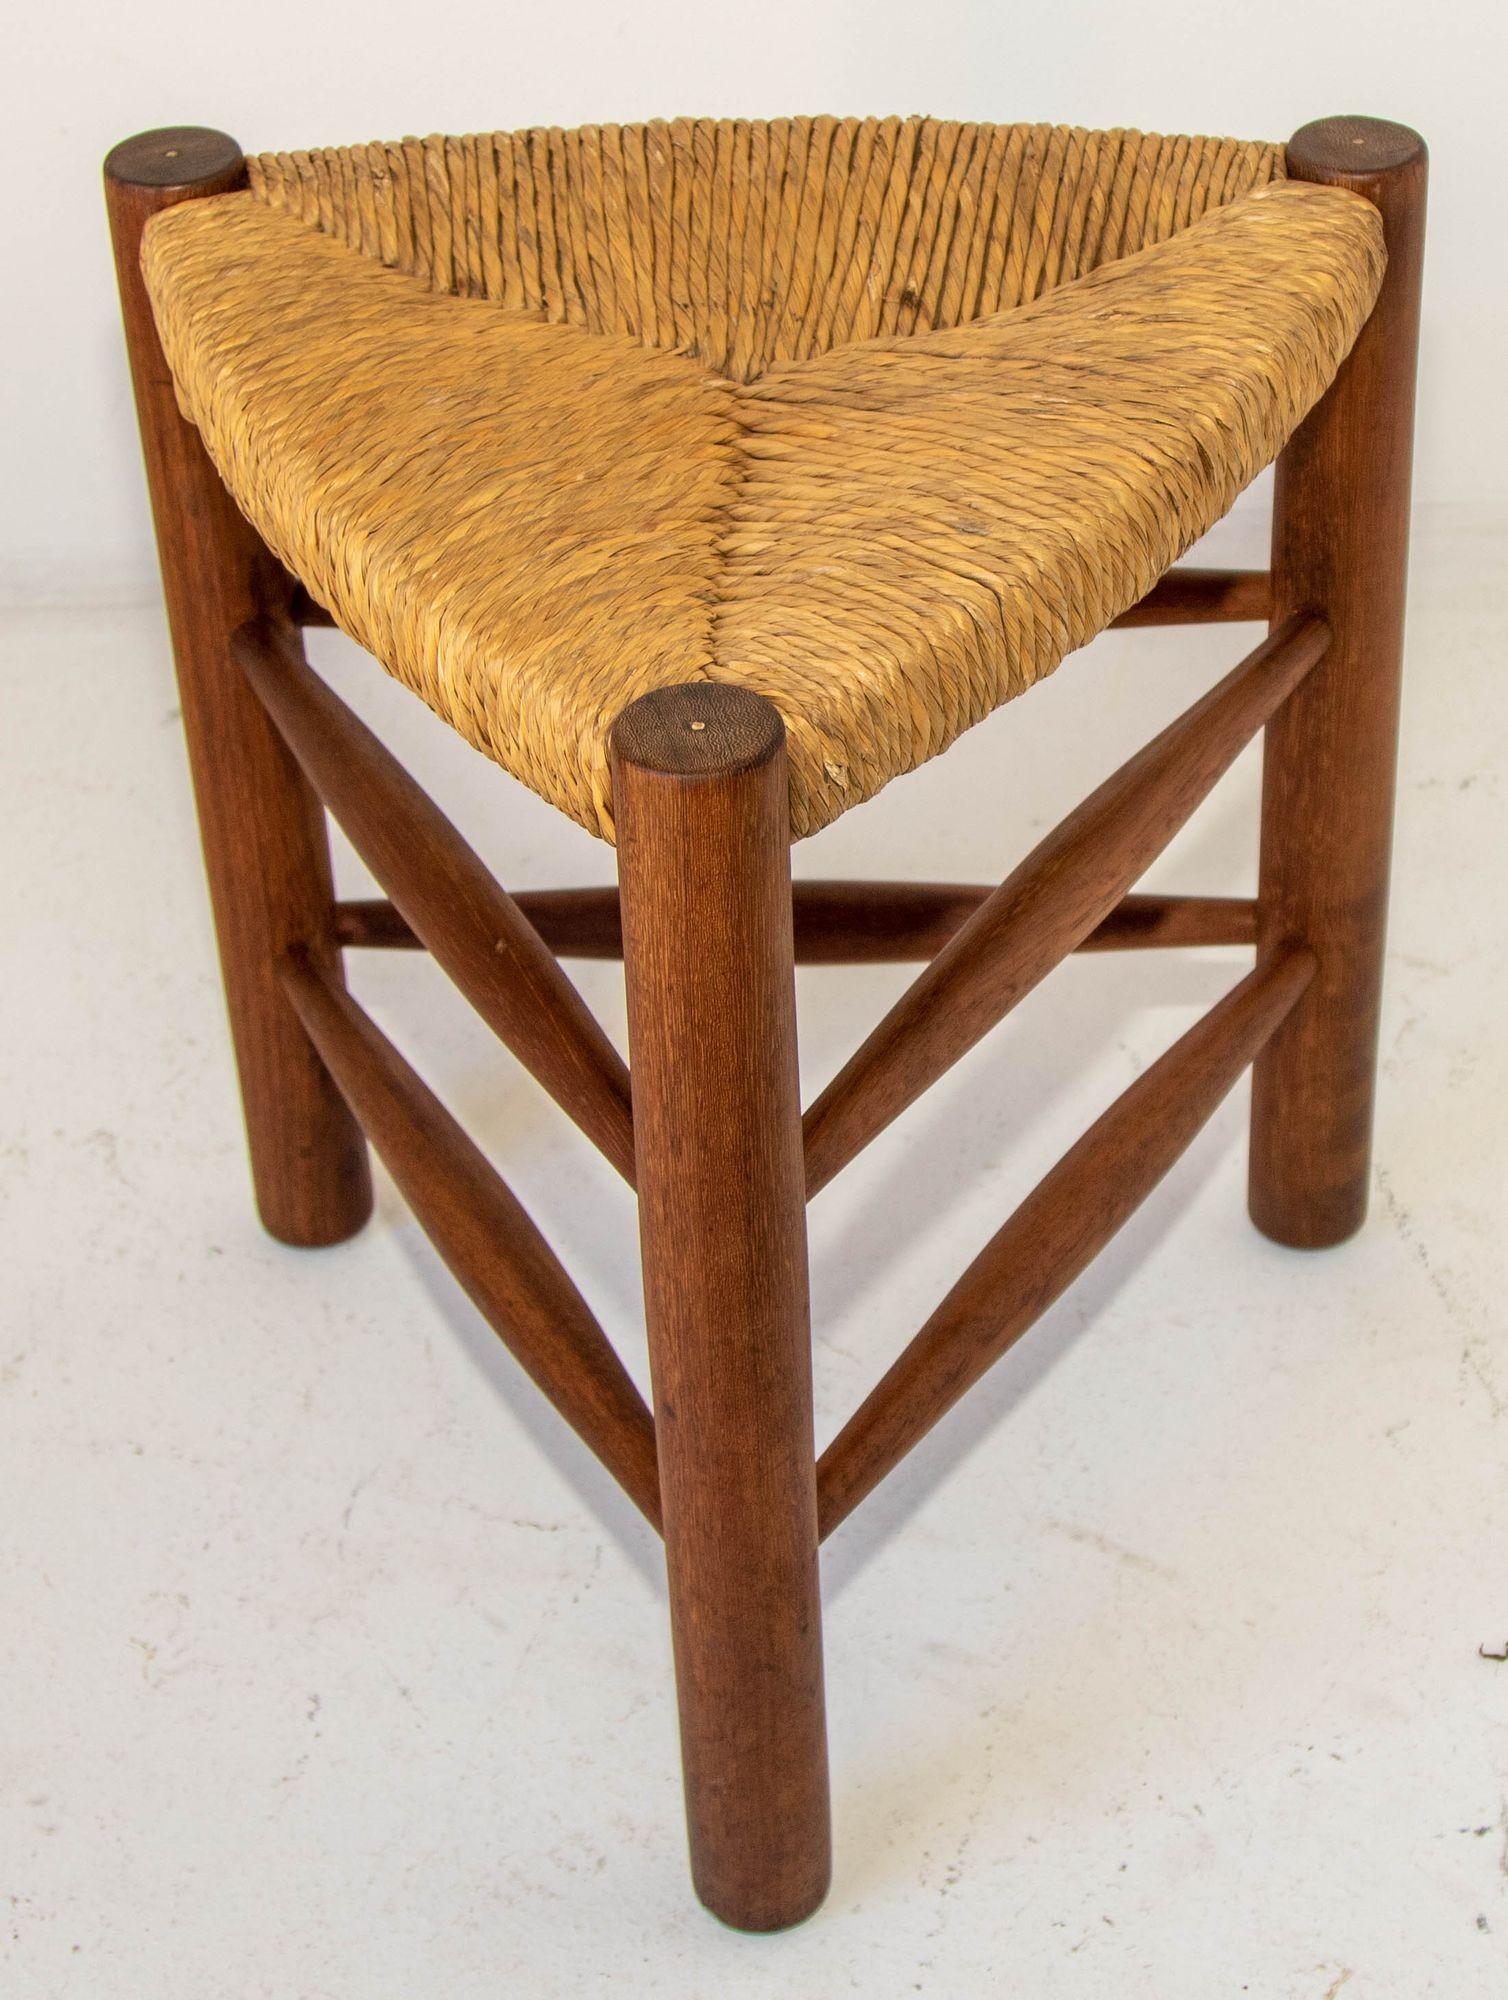 Vintage French Rush Woven Tripod Wooden Stool 1950 Charlotte Perriand Style In Good Condition For Sale In North Hollywood, CA